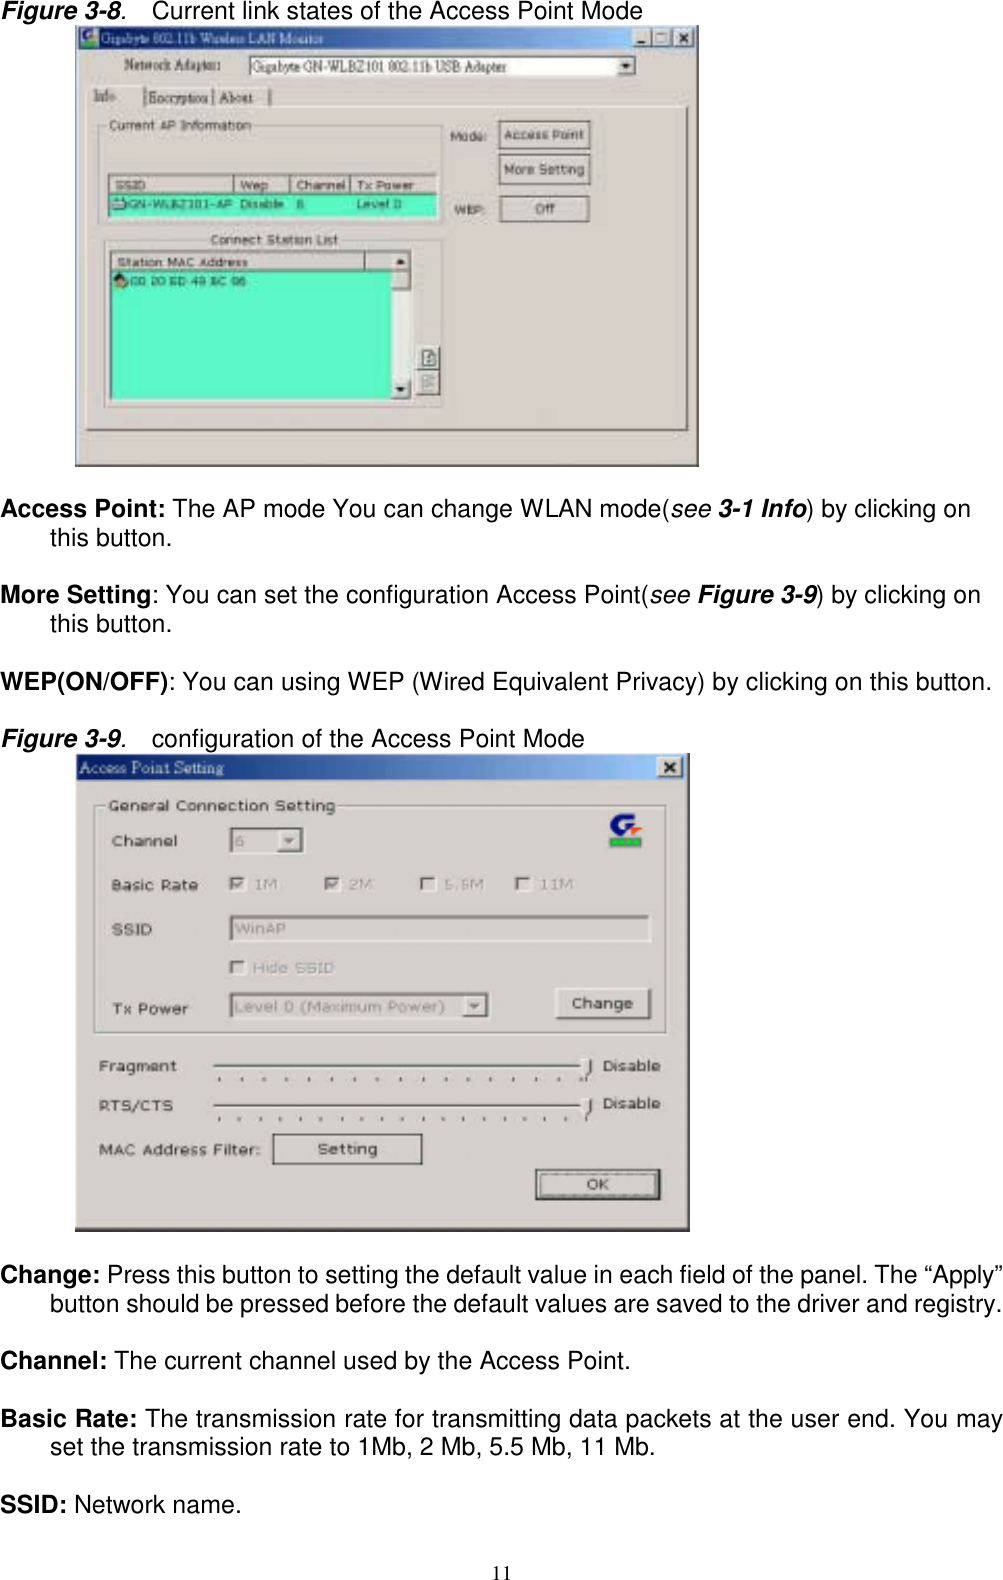 11Figure 3-8.  Current link states of the Access Point Mode      Access Point: The AP mode You can change WLAN mode(see 3-1 Info) by clicking onthis button.More Setting: You can set the configuration Access Point(see Figure 3-9) by clicking onthis button.WEP(ON/OFF): You can using WEP (Wired Equivalent Privacy) by clicking on this button.Figure 3-9.  configuration of the Access Point Mode      Change: Press this button to setting the default value in each field of the panel. The “Apply”button should be pressed before the default values are saved to the driver and registry.Channel: The current channel used by the Access Point.Basic Rate: The transmission rate for transmitting data packets at the user end. You mayset the transmission rate to 1Mb, 2 Mb, 5.5 Mb, 11 Mb.SSID: Network name.